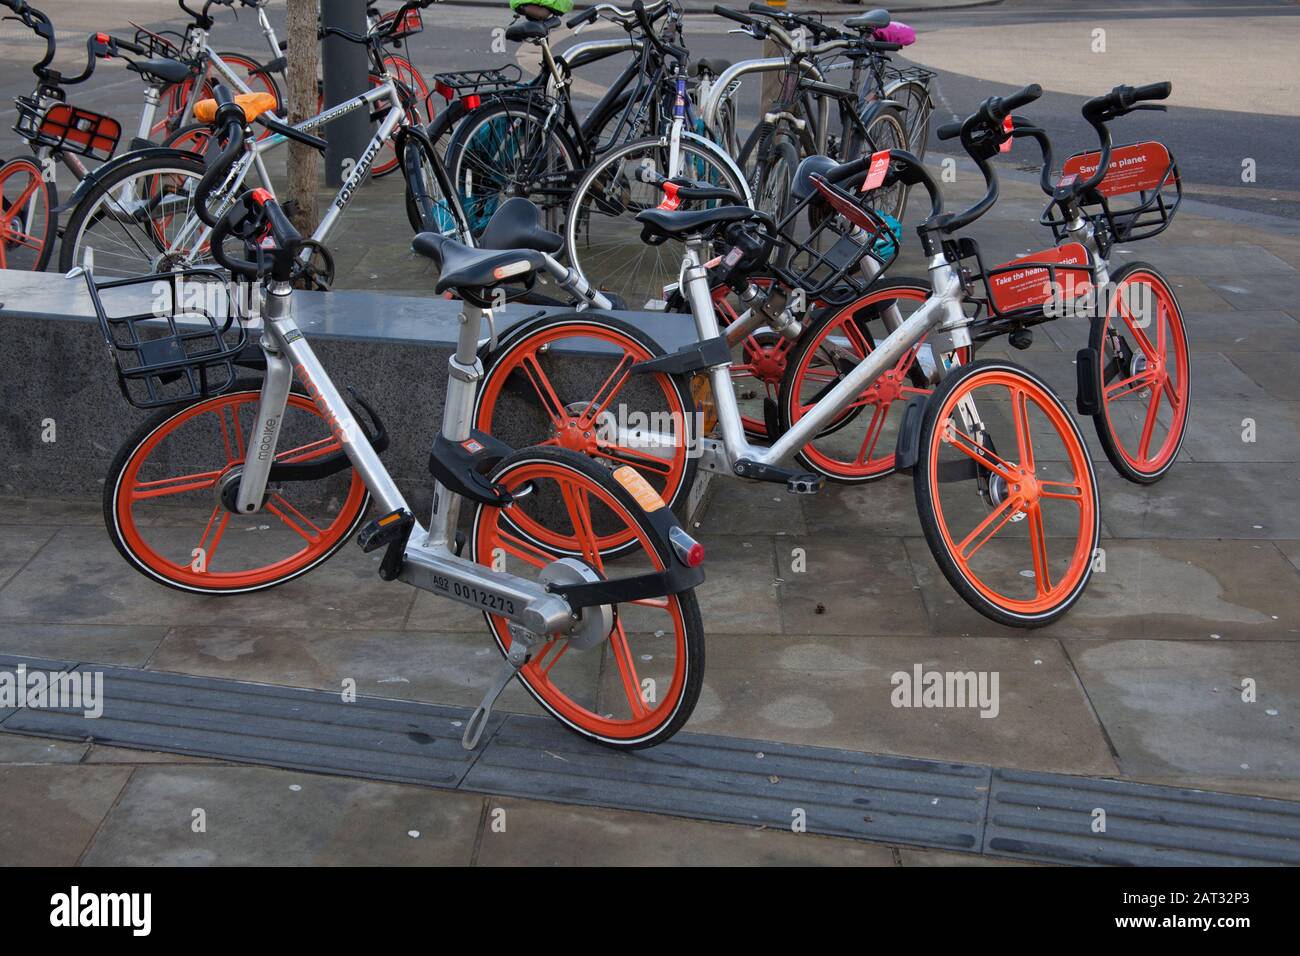 Mobikes for hire in Oxford:  Their bikes are bright metallic silver with unusual orange wheels. Stock Photo